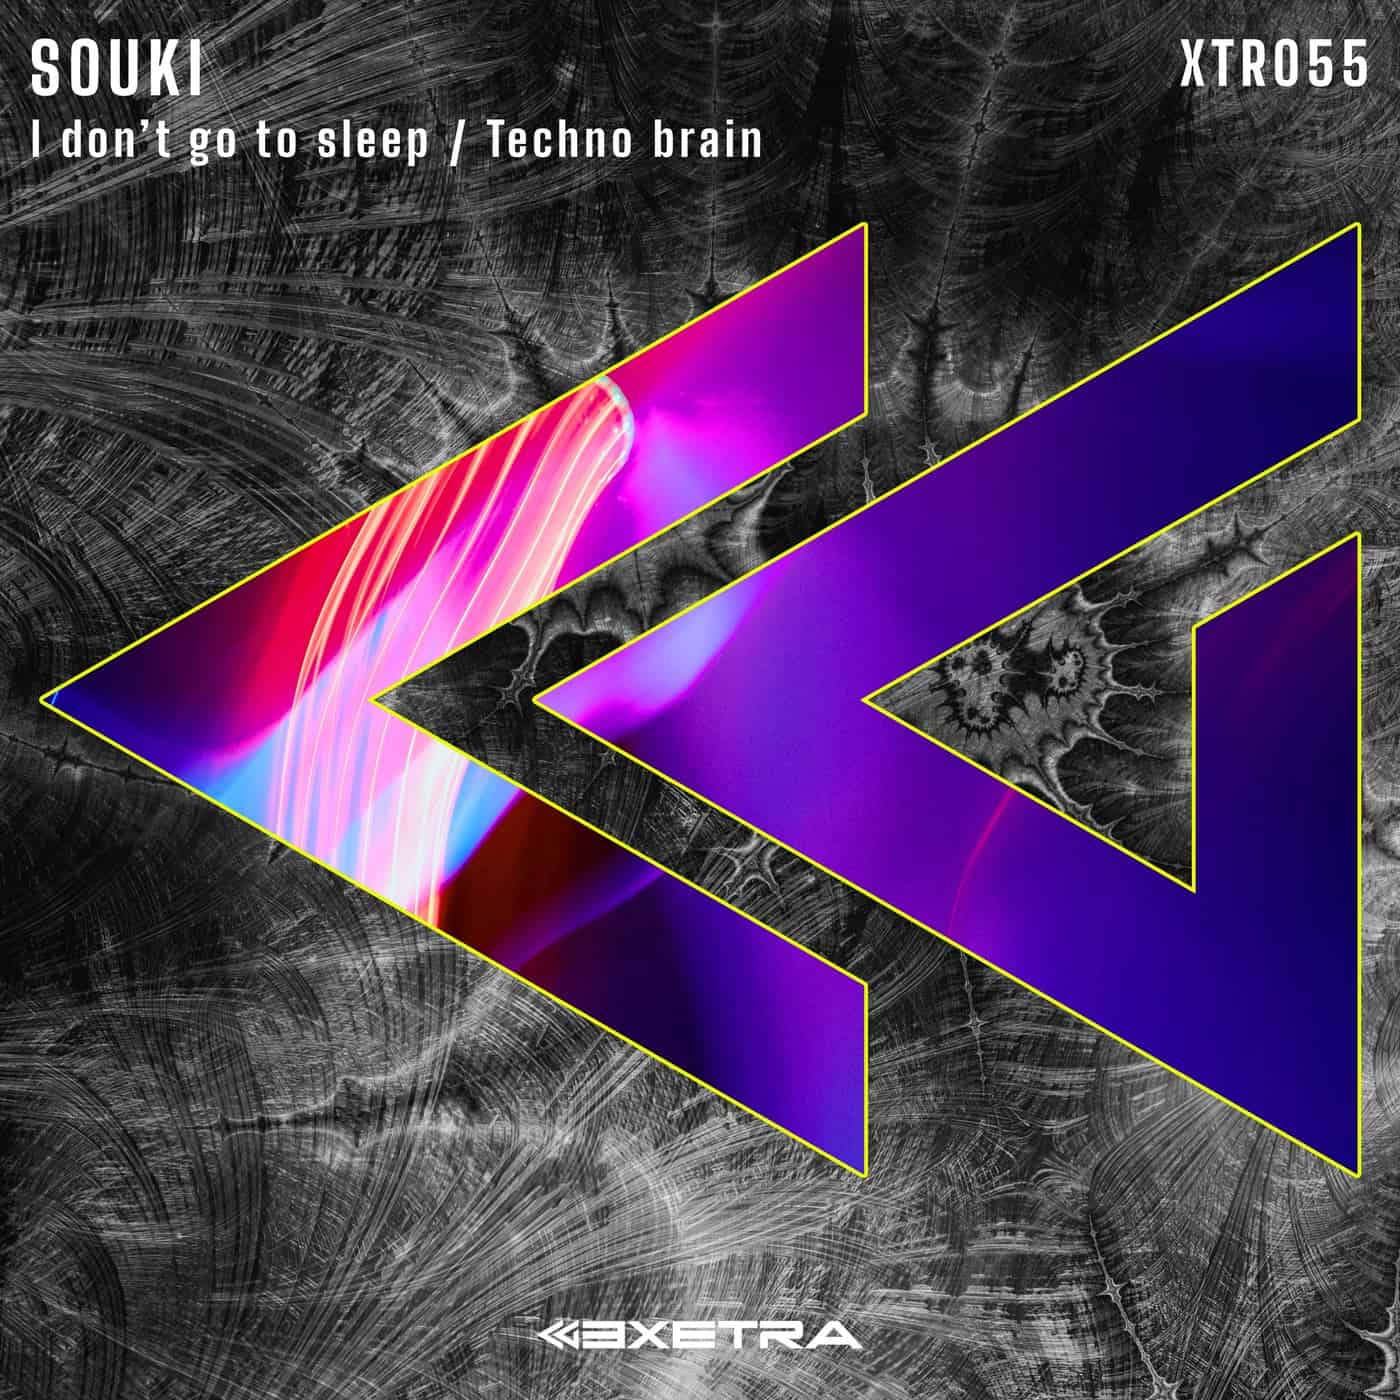 image cover: I Don't Go To Sleep / Techno Brain by Souki on Exetra Records